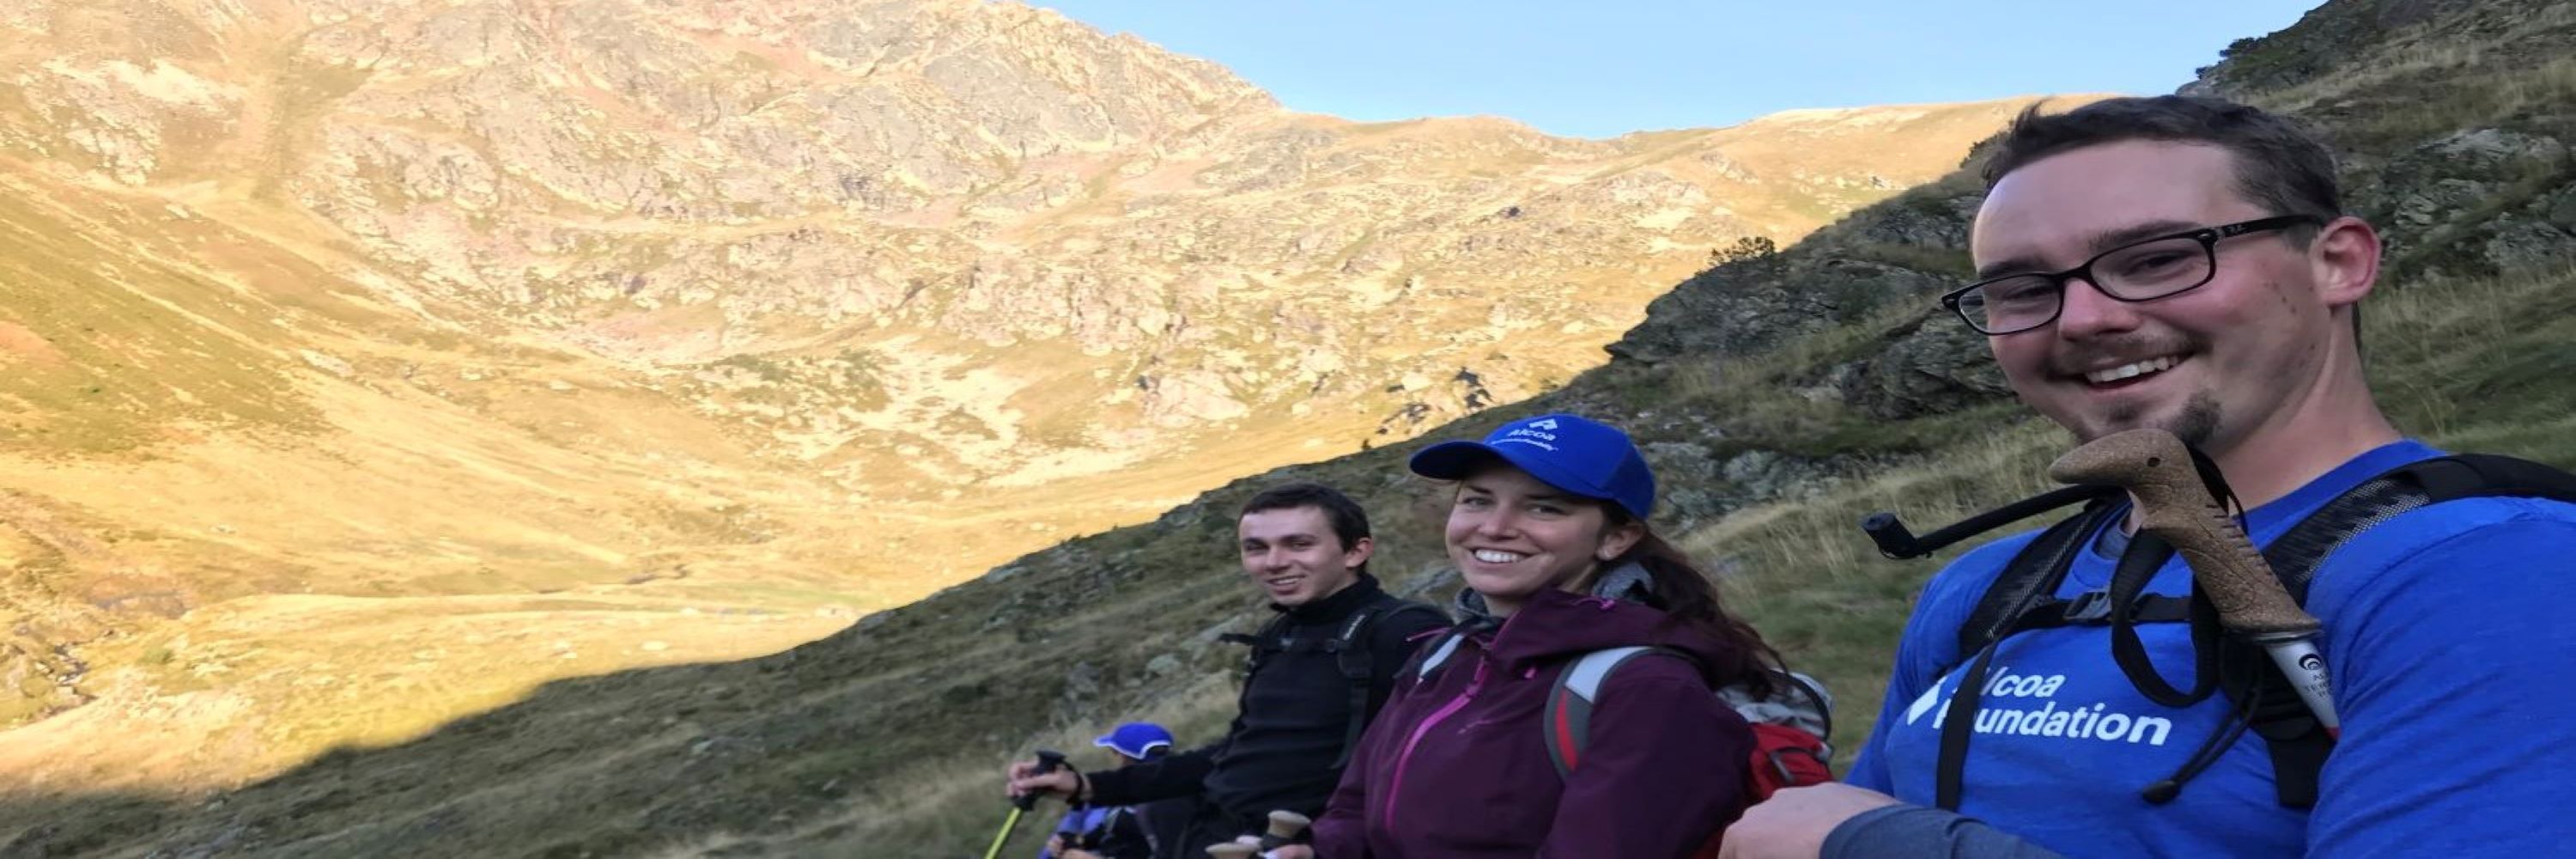 Alcoa employees hiking in the Andorran Pyrenees